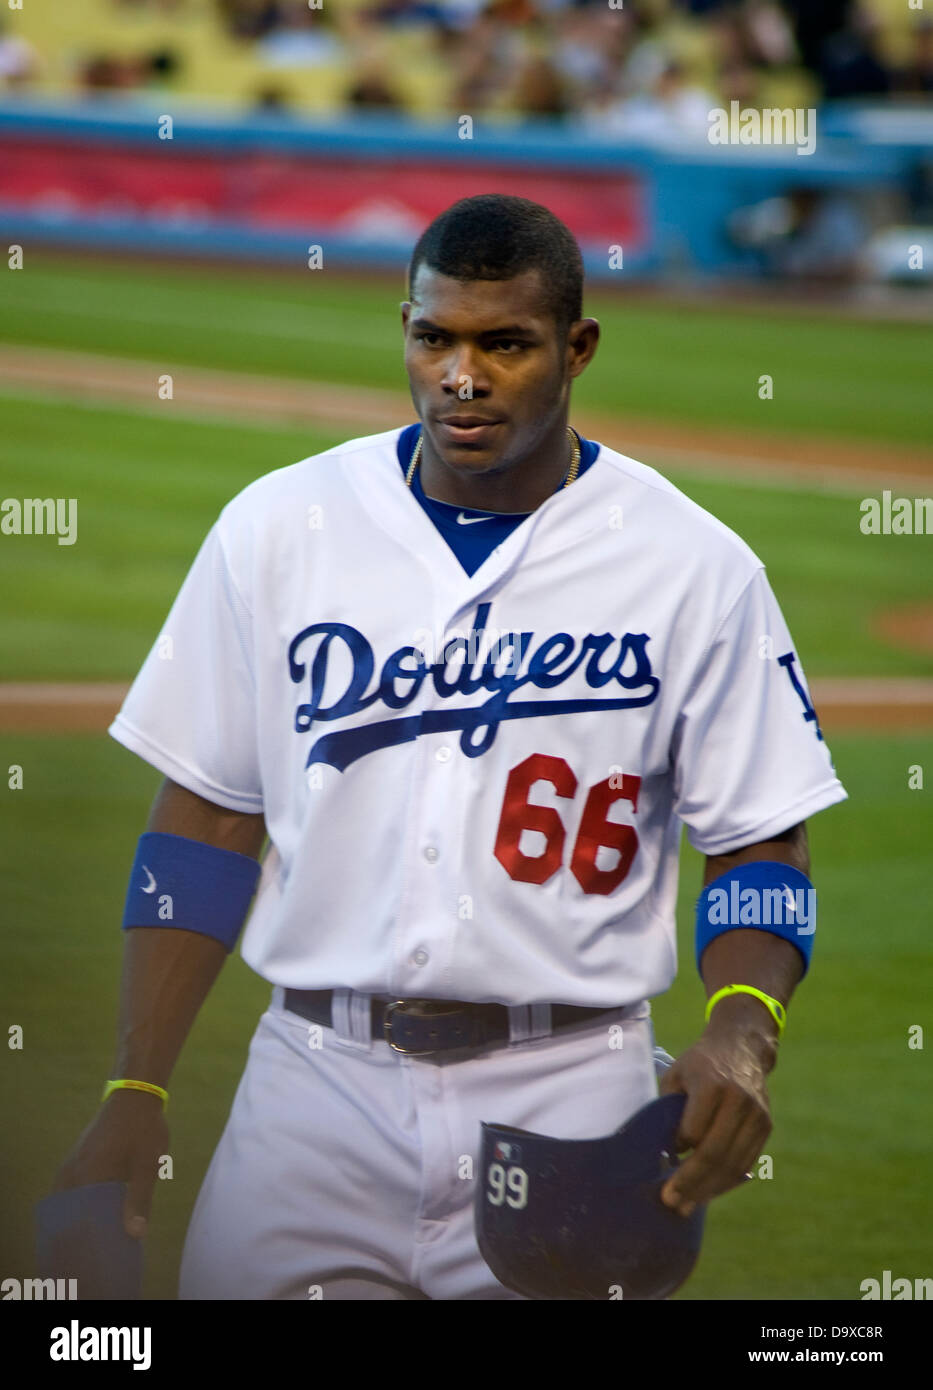 Yasiel Puig's No. 66 jersey a bestseller; four Dodgers in top 20 - Los  Angeles Times